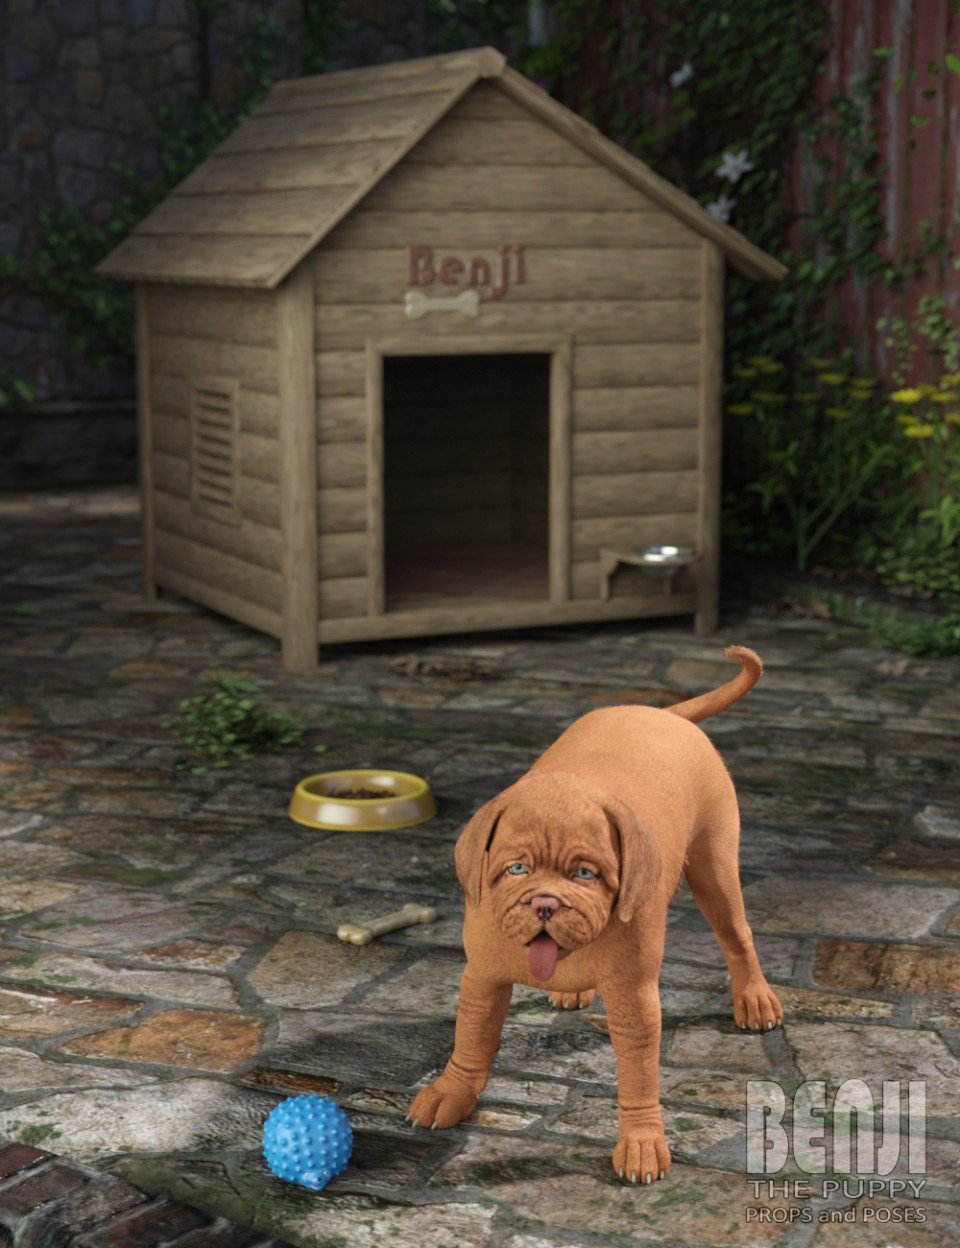 Benji The Puppy Props and Poses_DAZ3D下载站